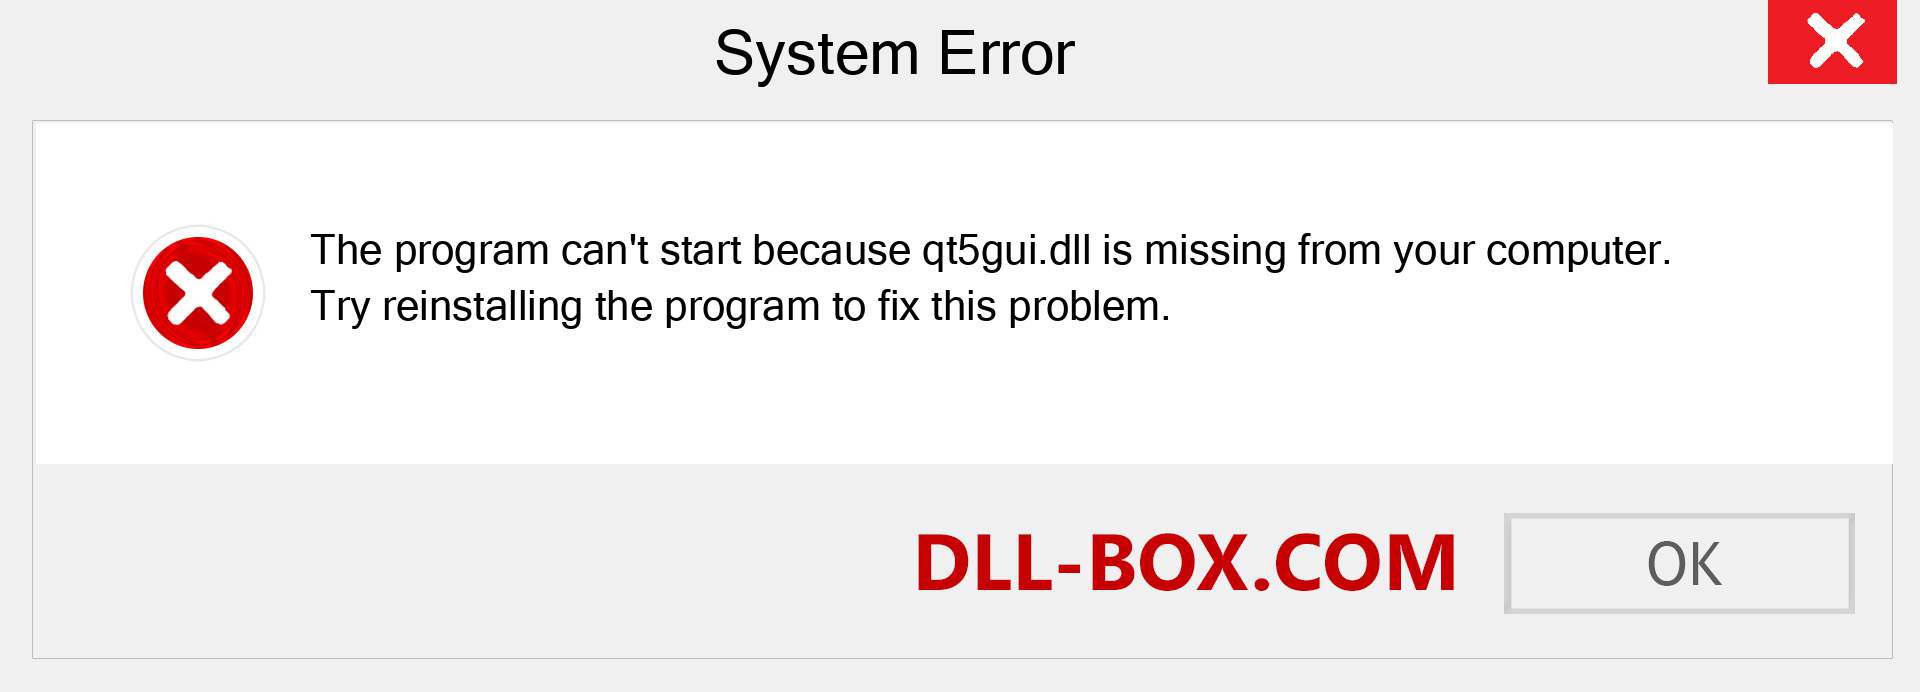  qt5gui.dll file is missing?. Download for Windows 7, 8, 10 - Fix  qt5gui dll Missing Error on Windows, photos, images